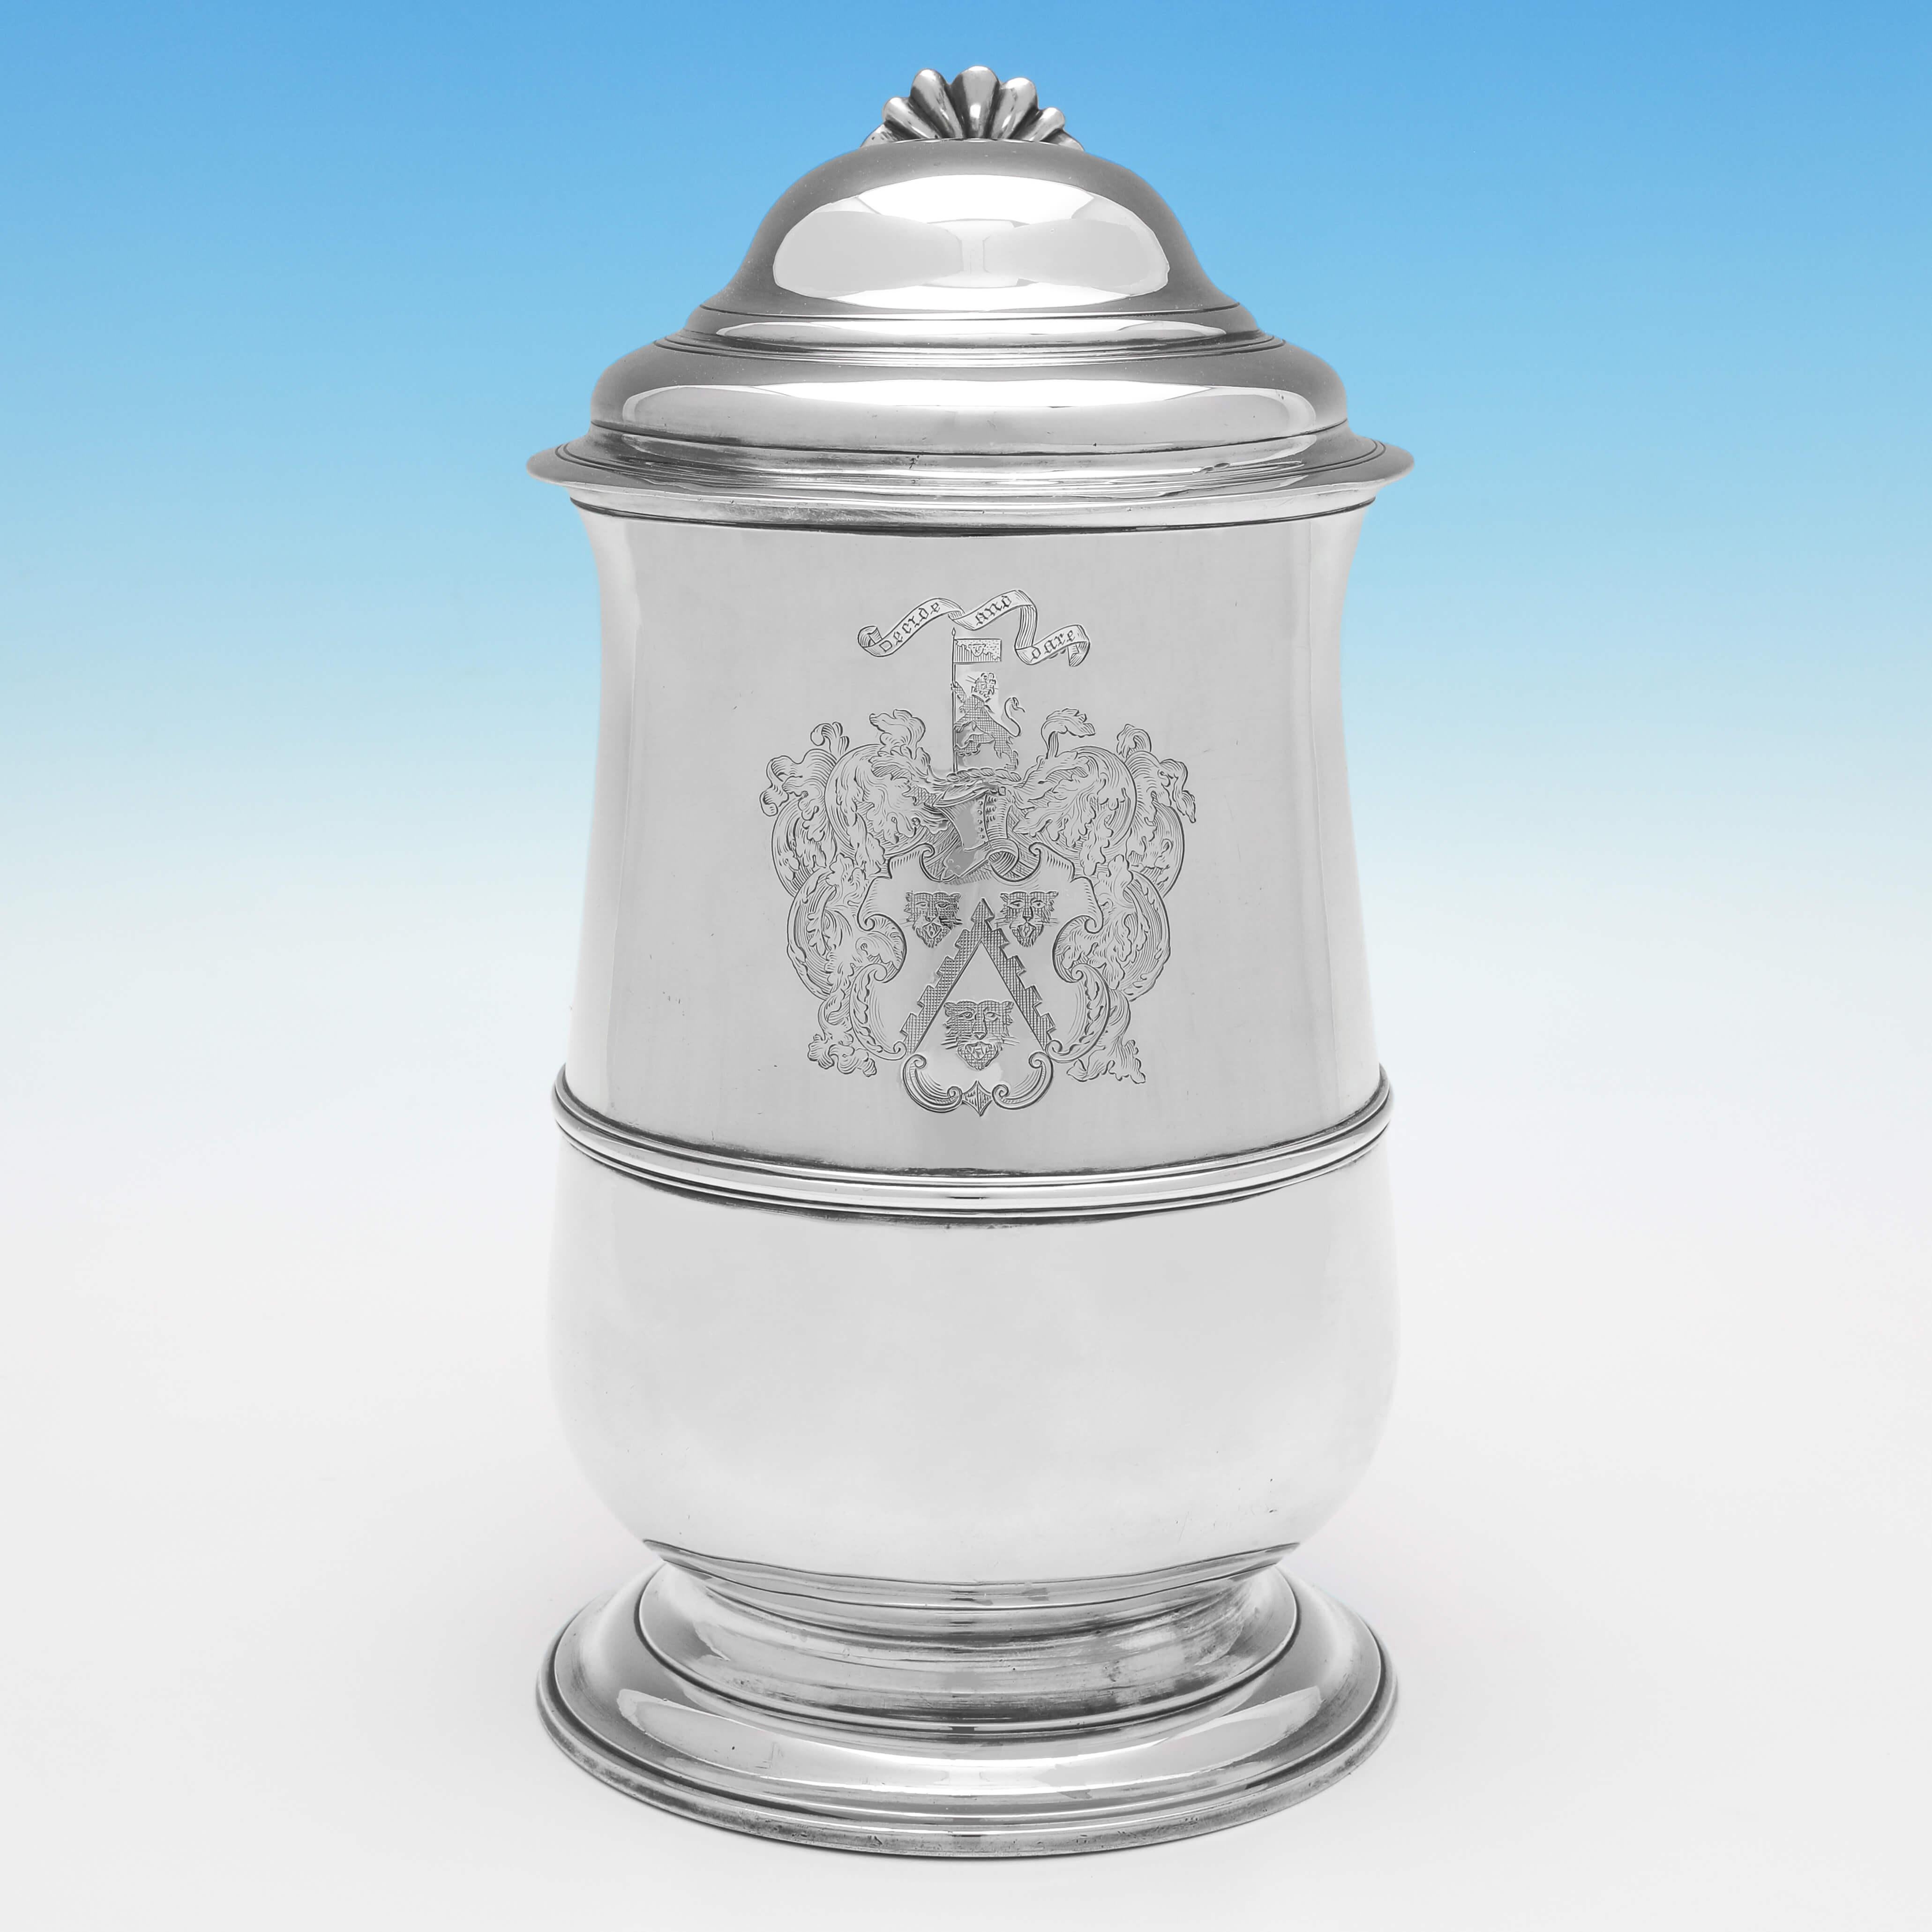 Hallmarked in London in 1772 by William Plummer, this handsome, George III, Antique Sterling Silver Tankard, is baluster shaped, and features reed detailing, a domed lid, and an engraved coat of arms opposite the handle. 

The tankard measures